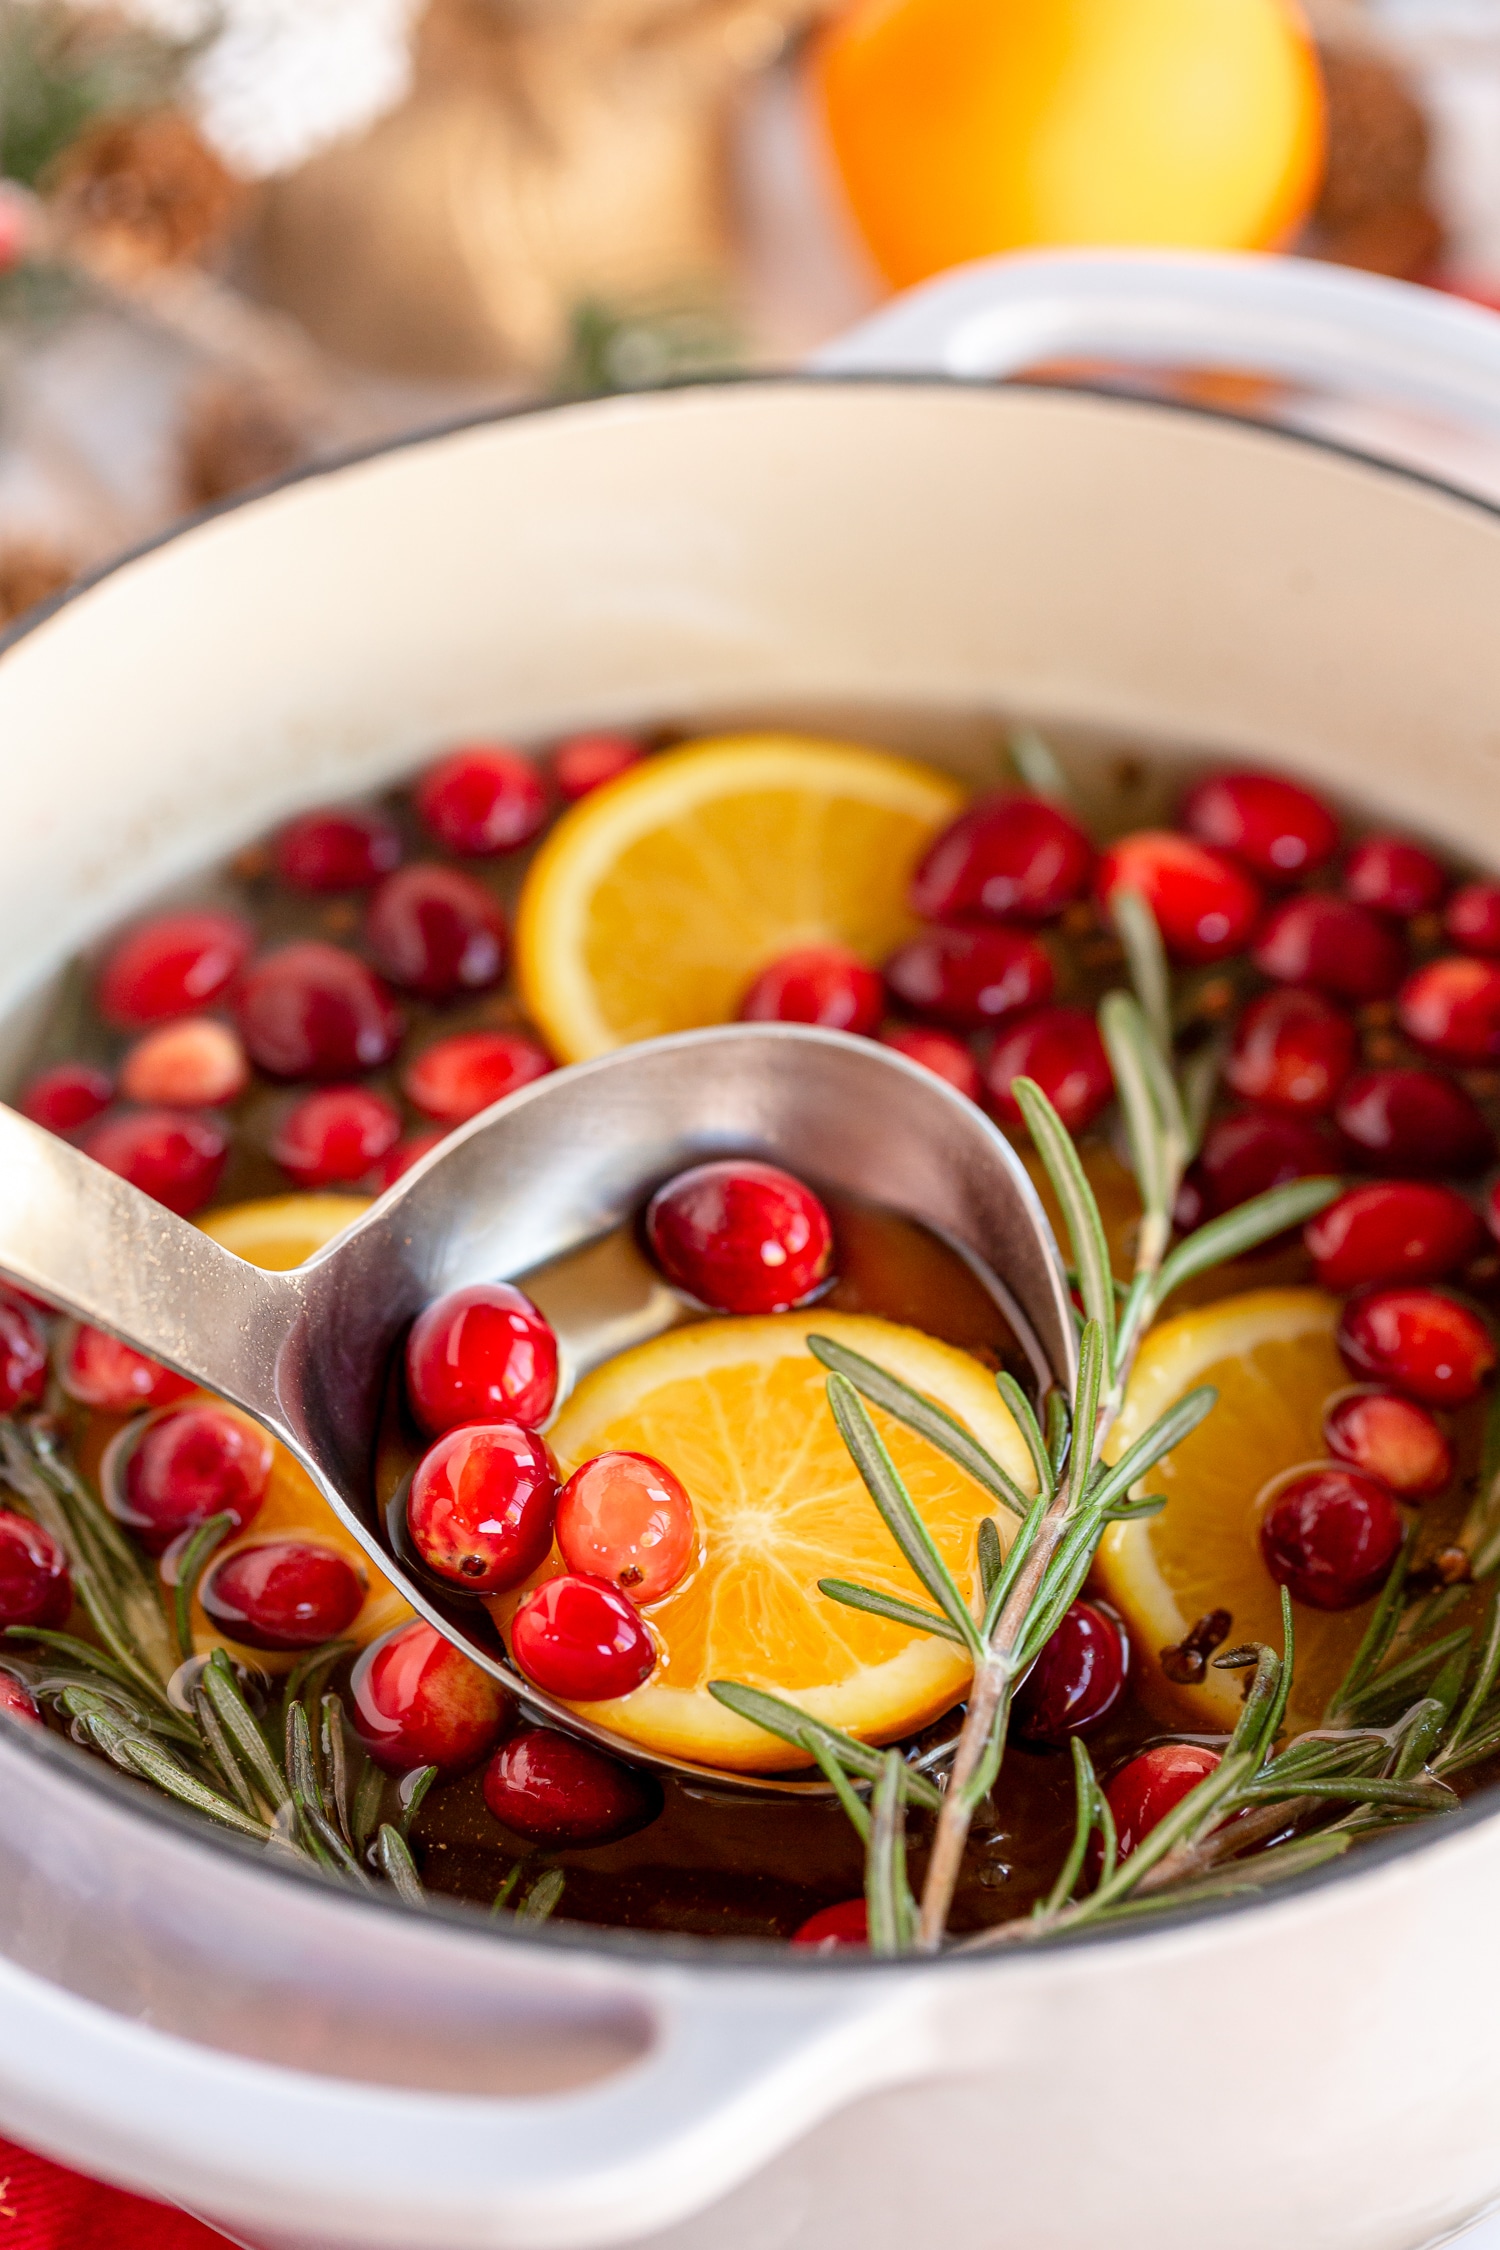 rosemary, cranberries, orange slices added to pot